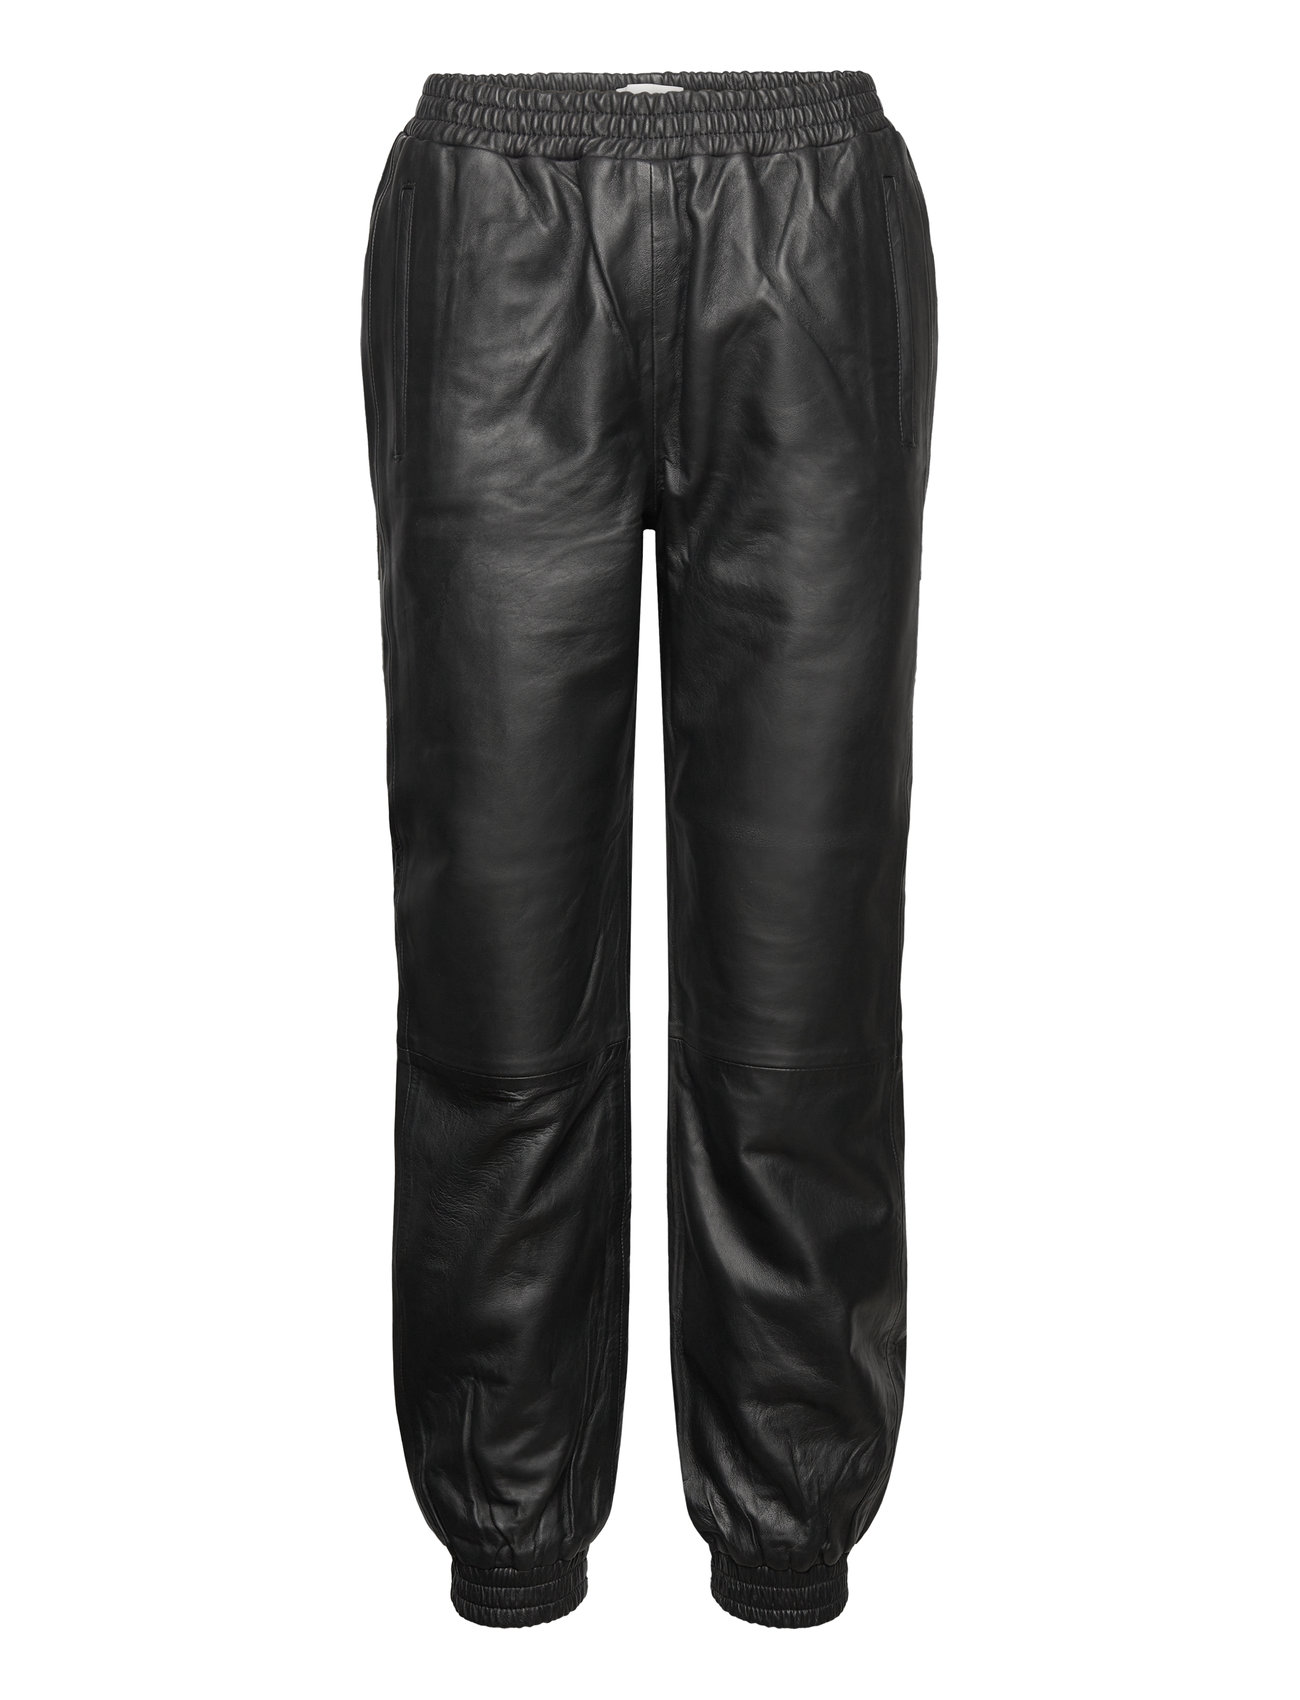 Lollys Laundry - Mona leather pants - party wear at outlet prices - black - 0